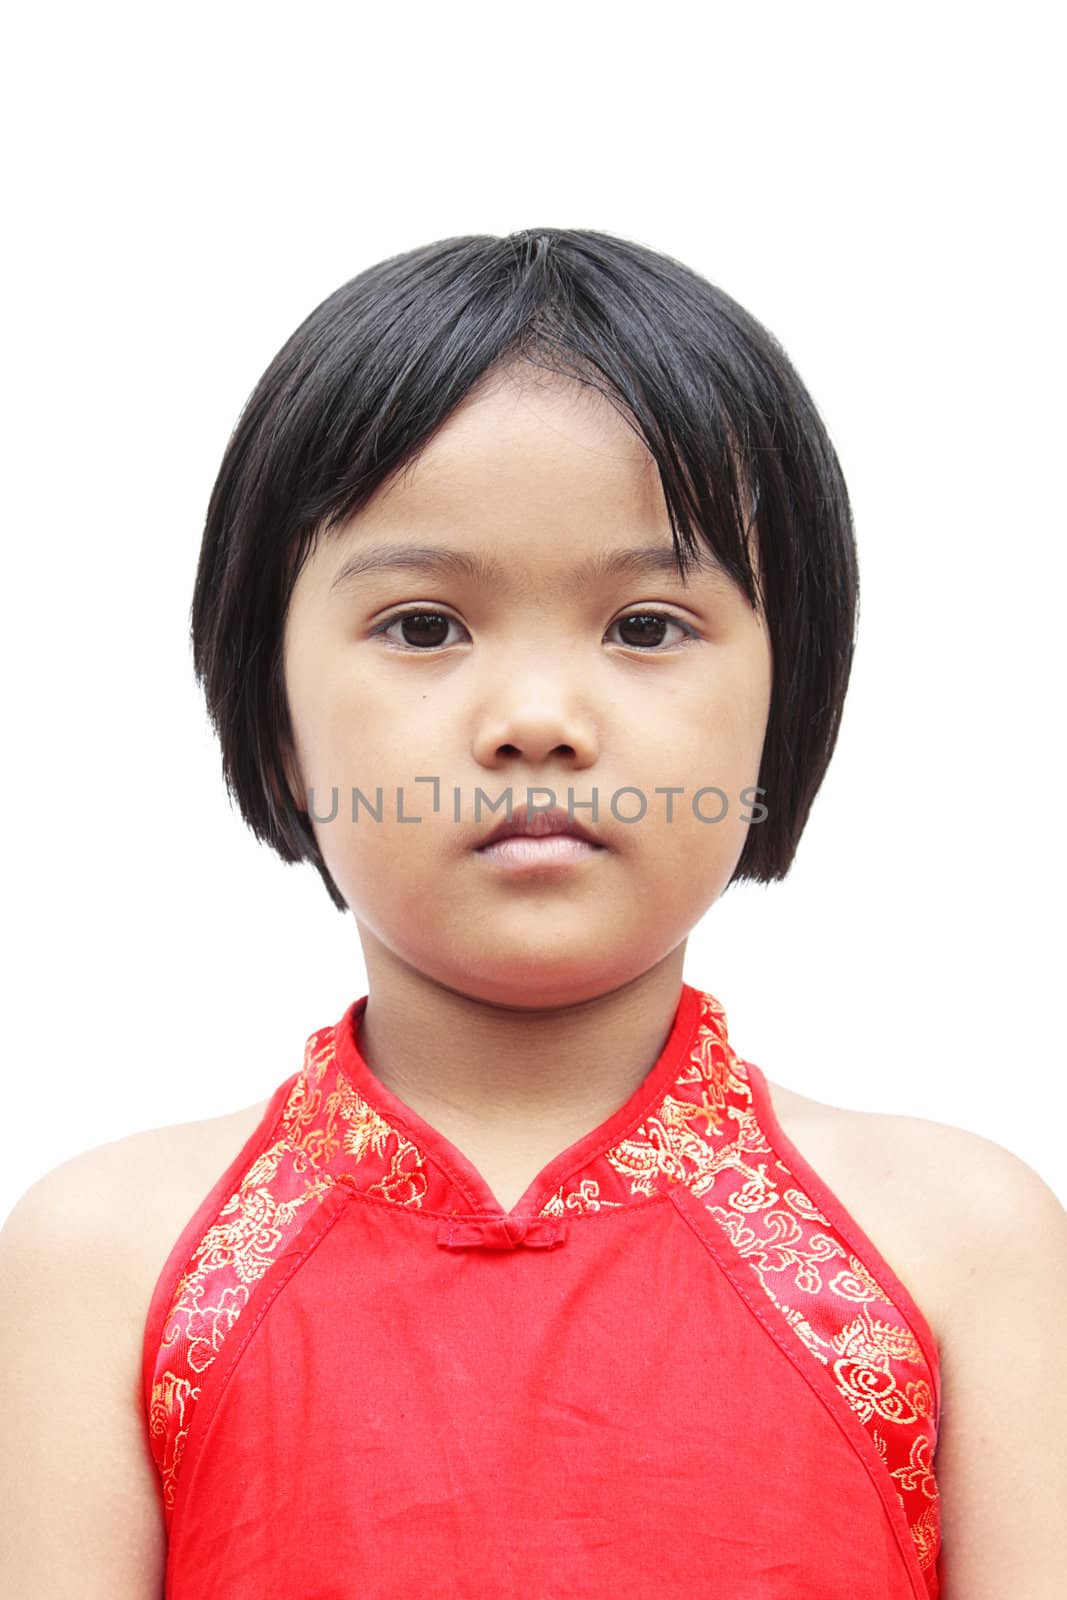 Children with red chinese dress isolated with white background







Thailand children in Chinese dress